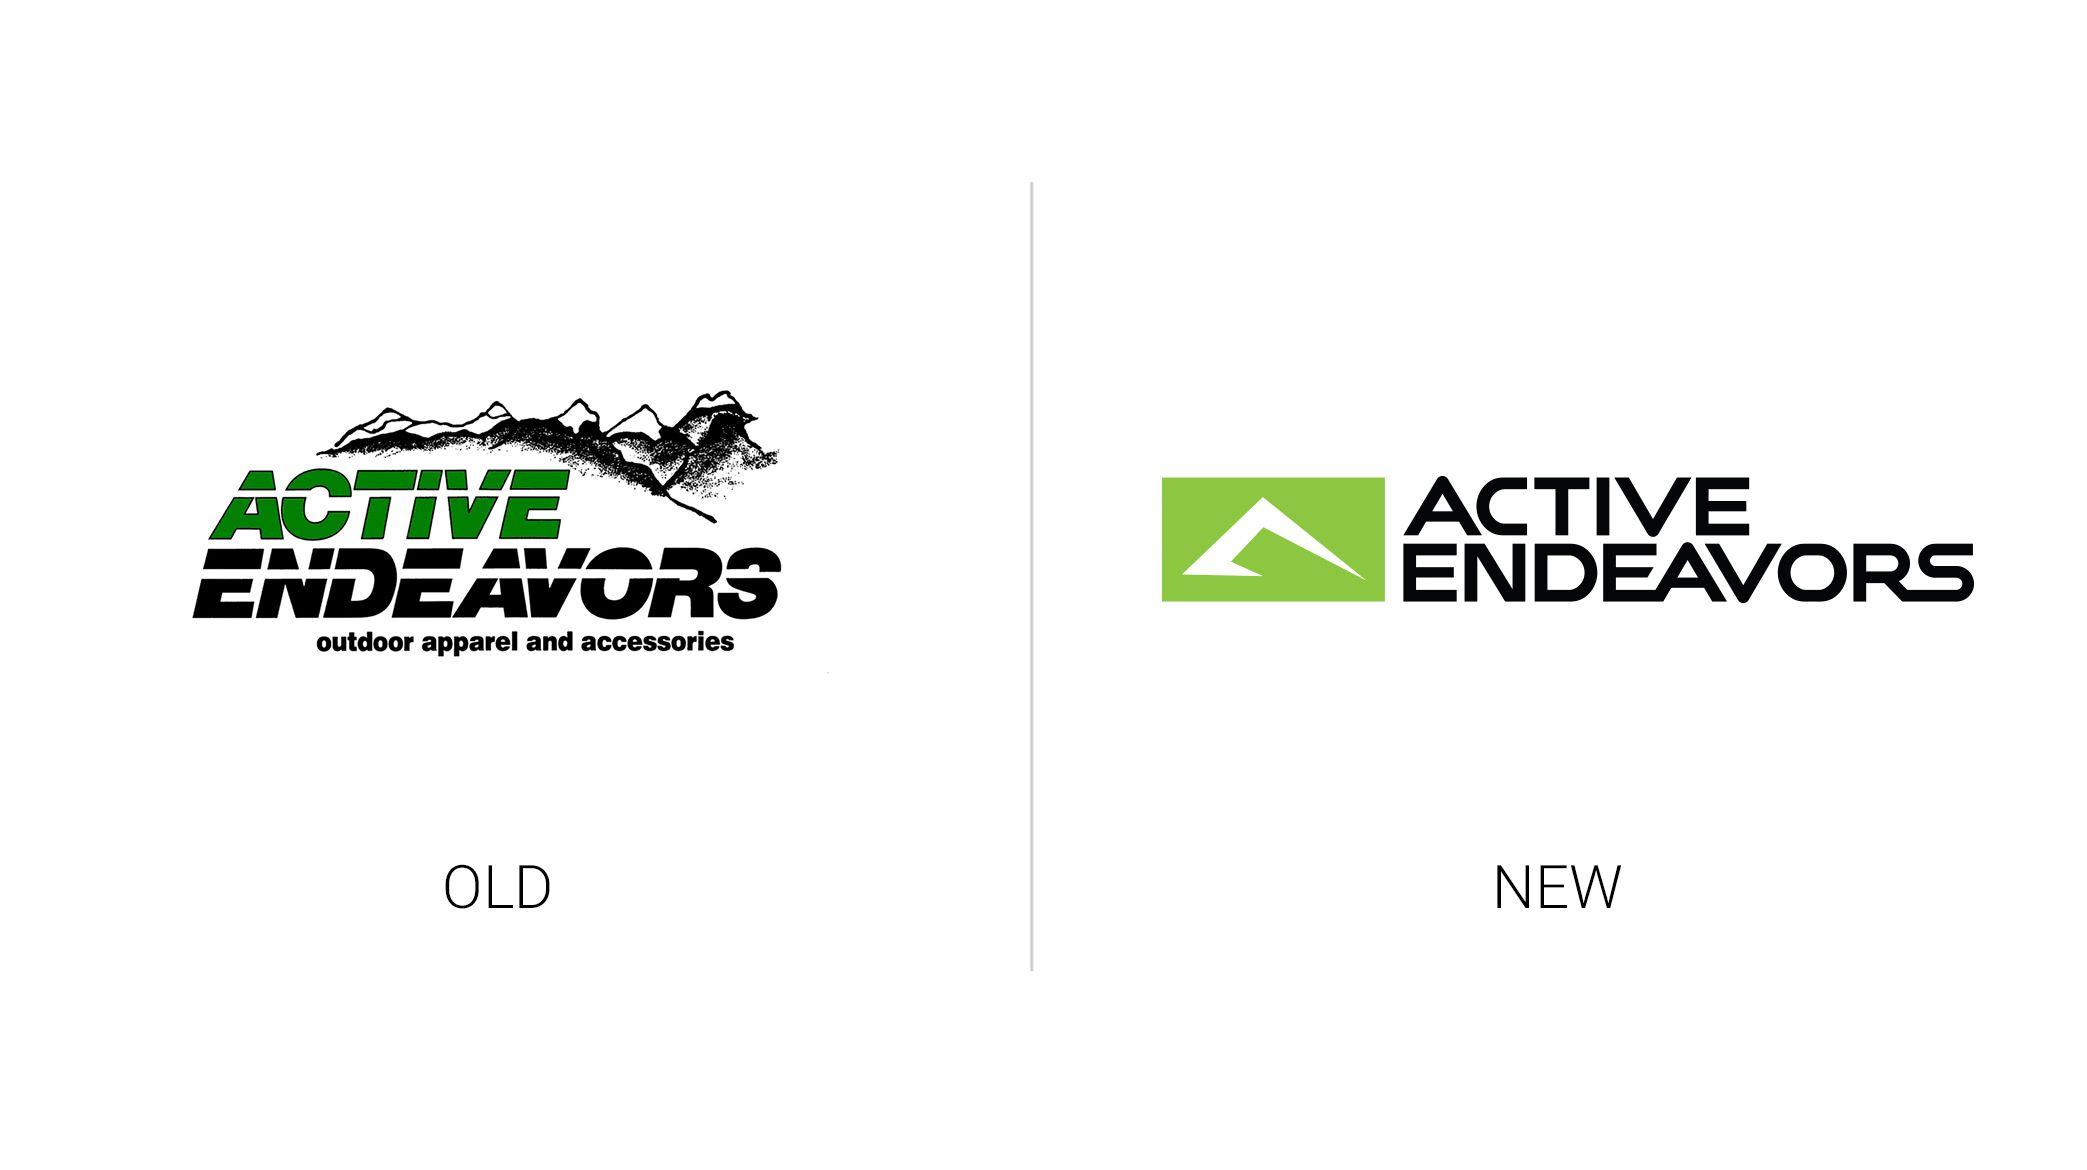 Outdoor Gear and Clothing Logo - FUEL. Active Endeavors Case Study. Brand Refresh, Brand Identity